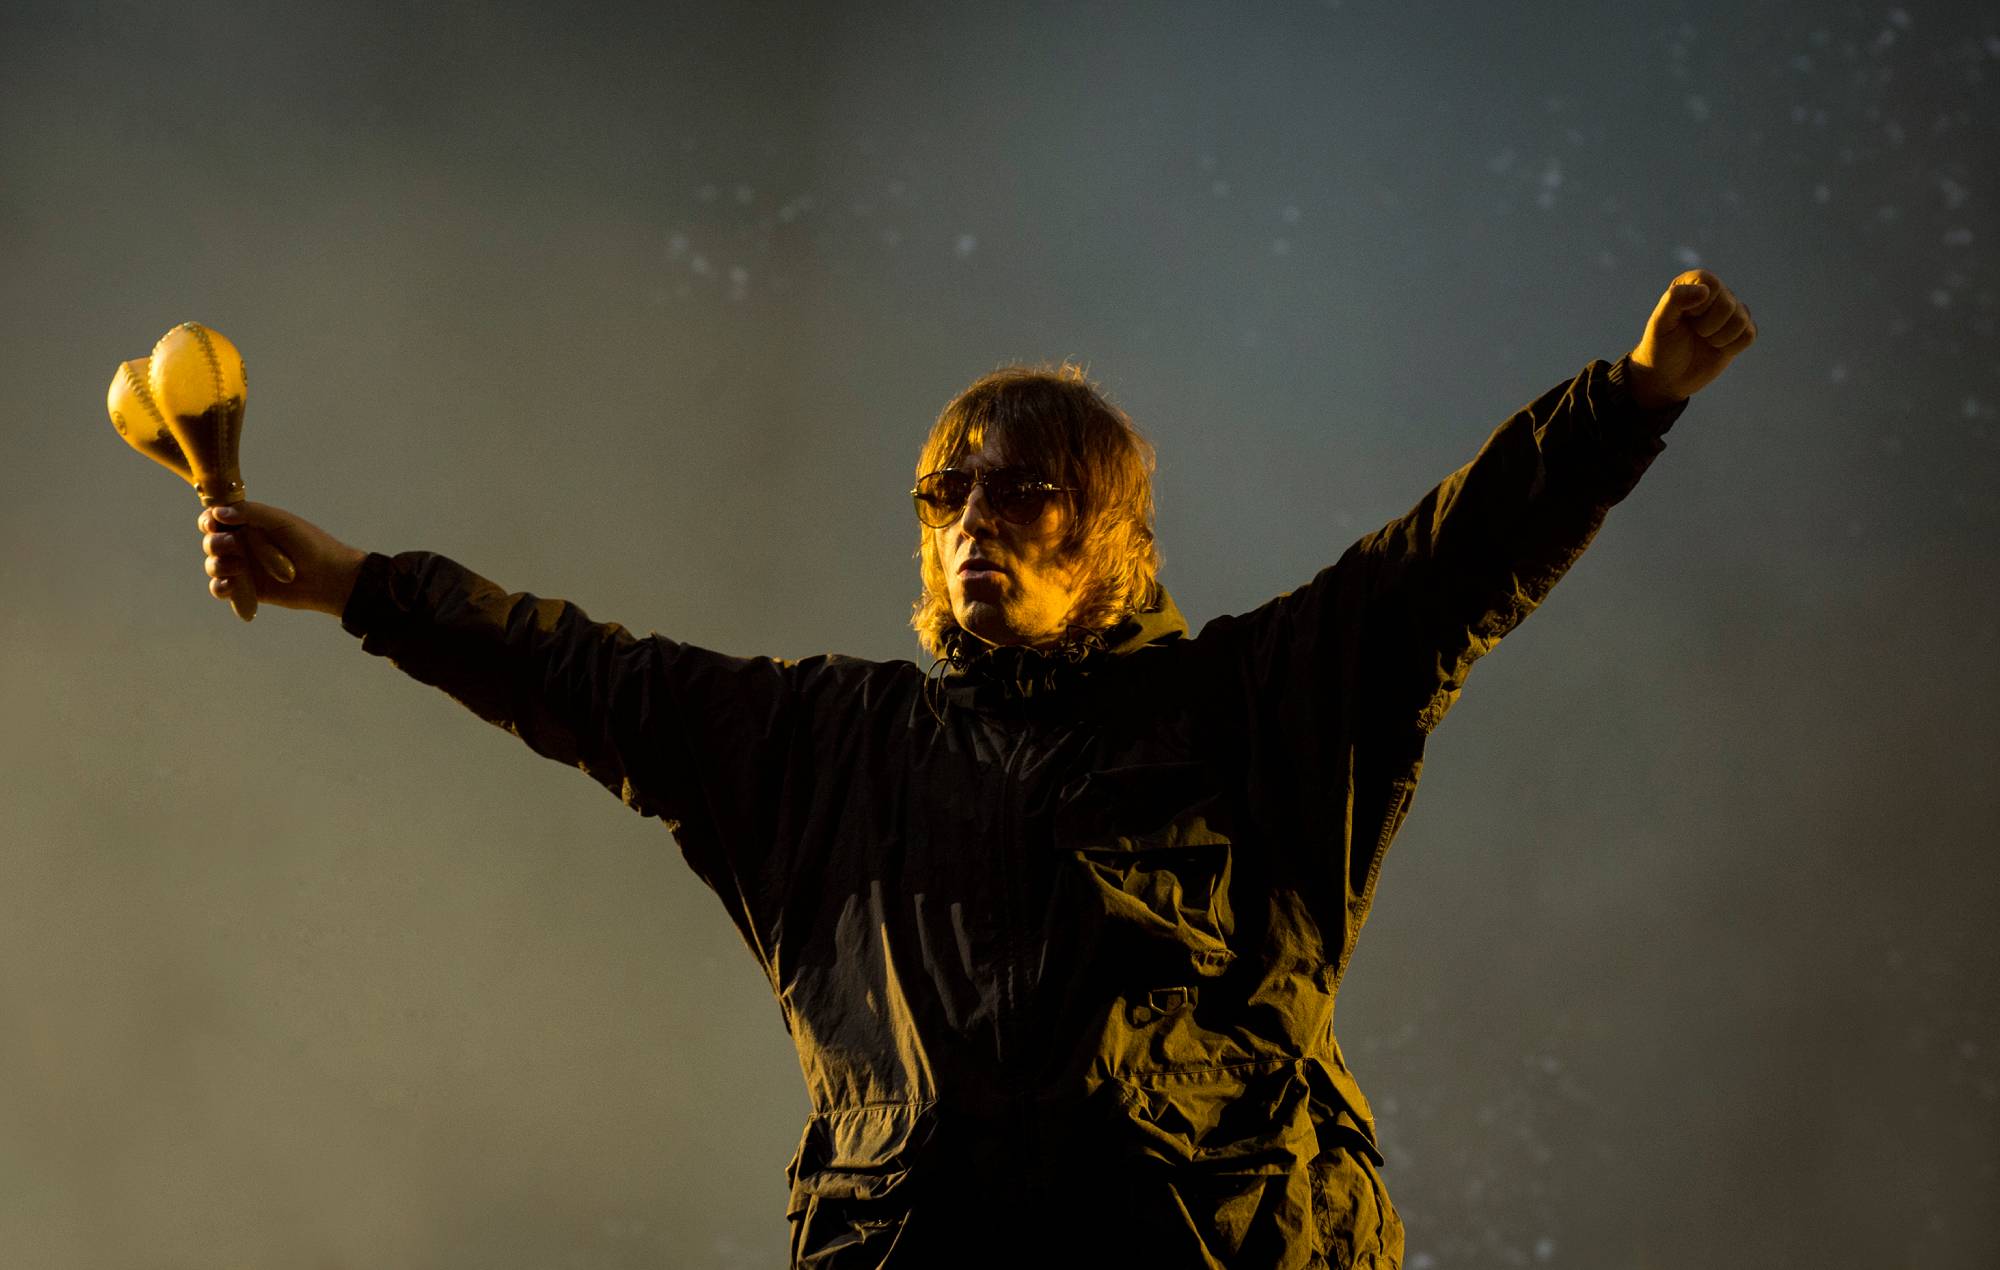 Liam Gallagher performs on stage at Isle Of Wight Festival 2021 at Seaclose Park on September 17, 2021 in Newport, Isle of Wight. (Photo by Mark Holloway/Redferns)